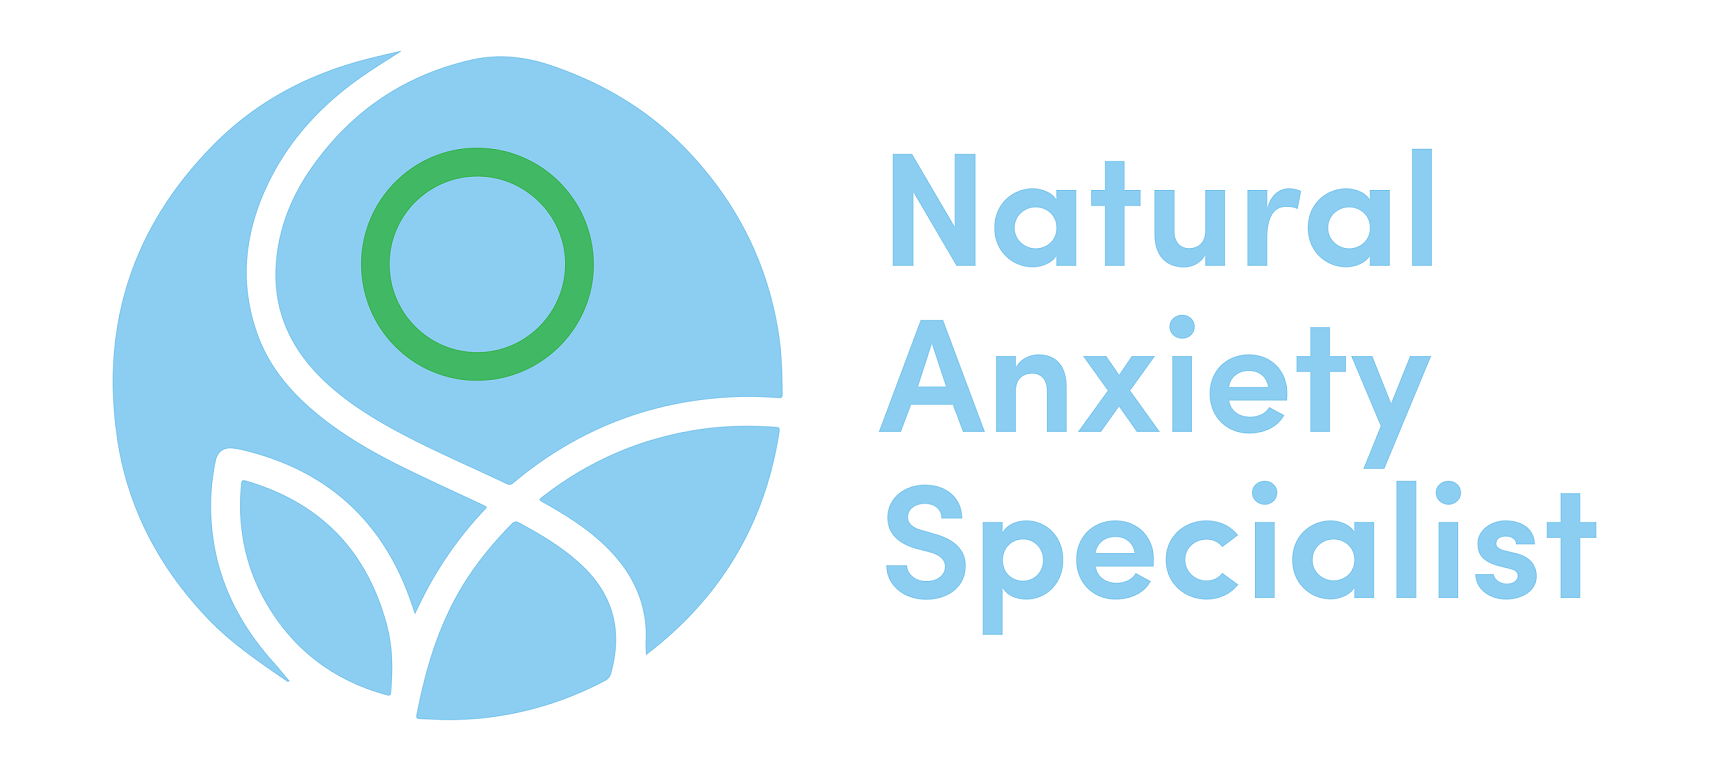 Natural Anxiety Specialist